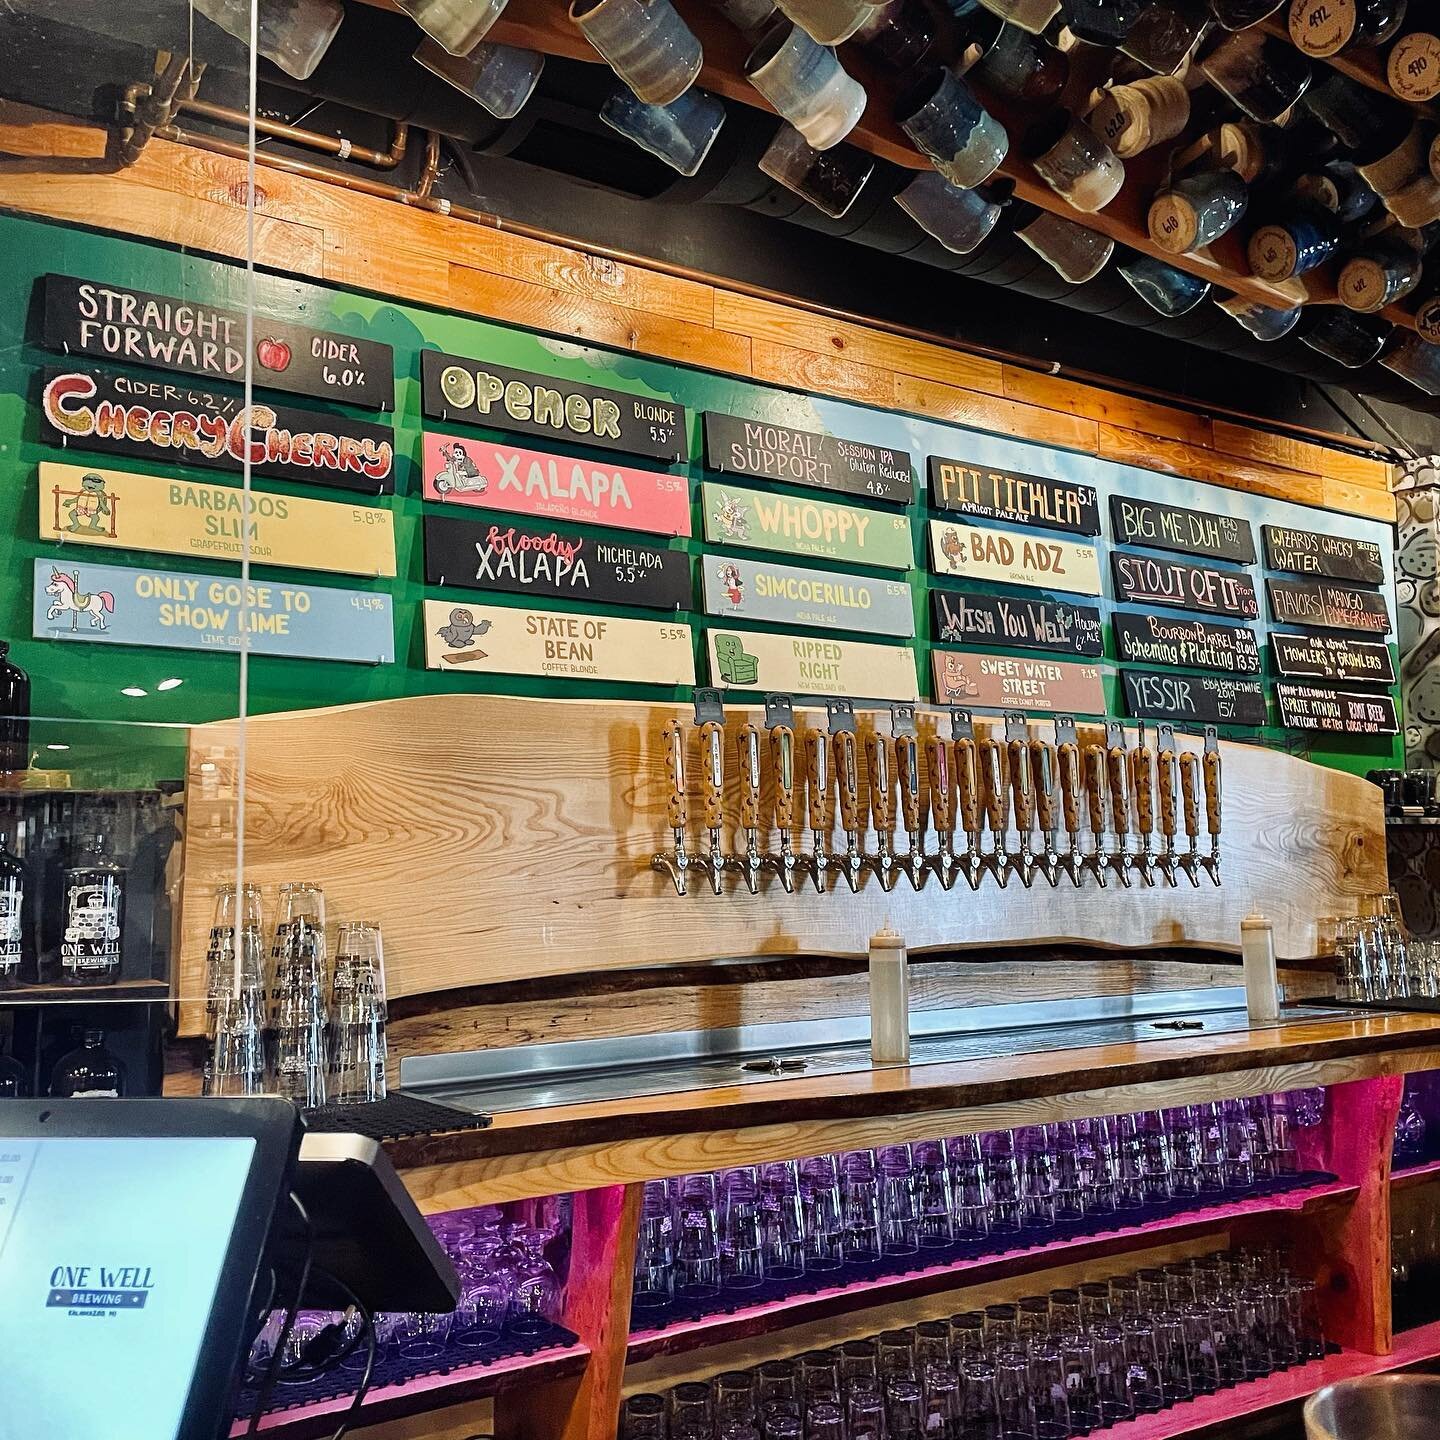 What's on draft? A whole lot of awesome craft adult beverages! Your favorite blondes, flavorful IPAs, tasty ales, mead, rich stouts, powerful BBAs, sweet ciders and fruity seltzers. Something for every taste bud! Check out the draft list at onewellbr